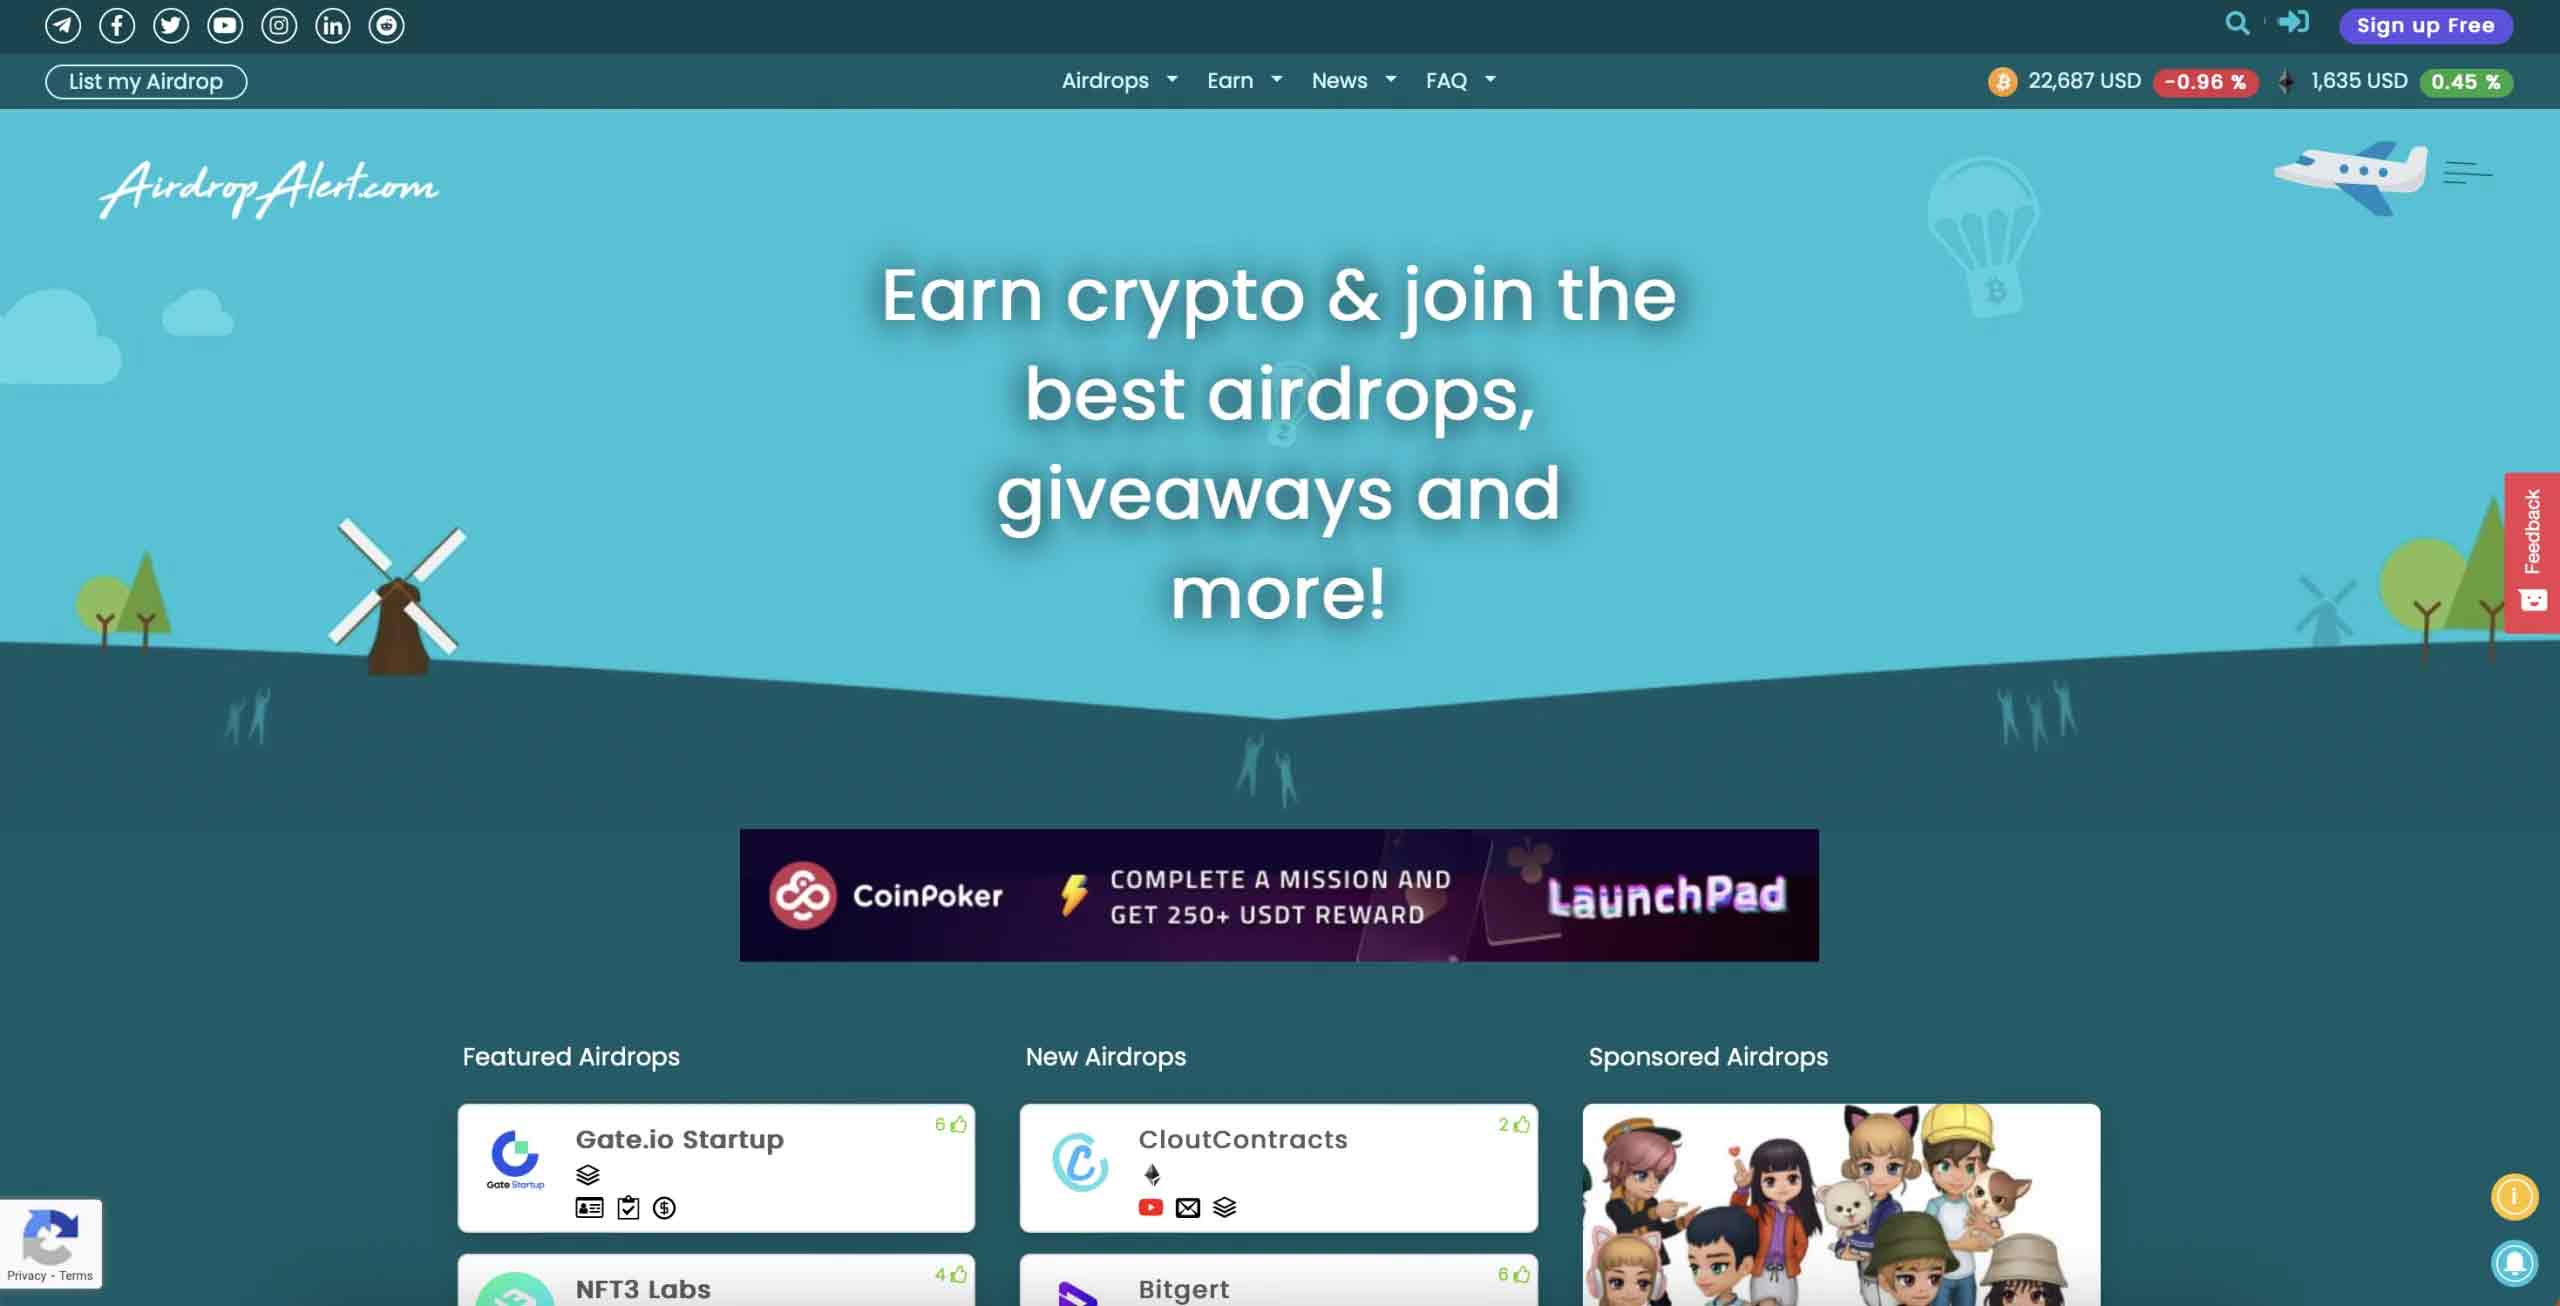 The landing page of a crypto airdrops website. 